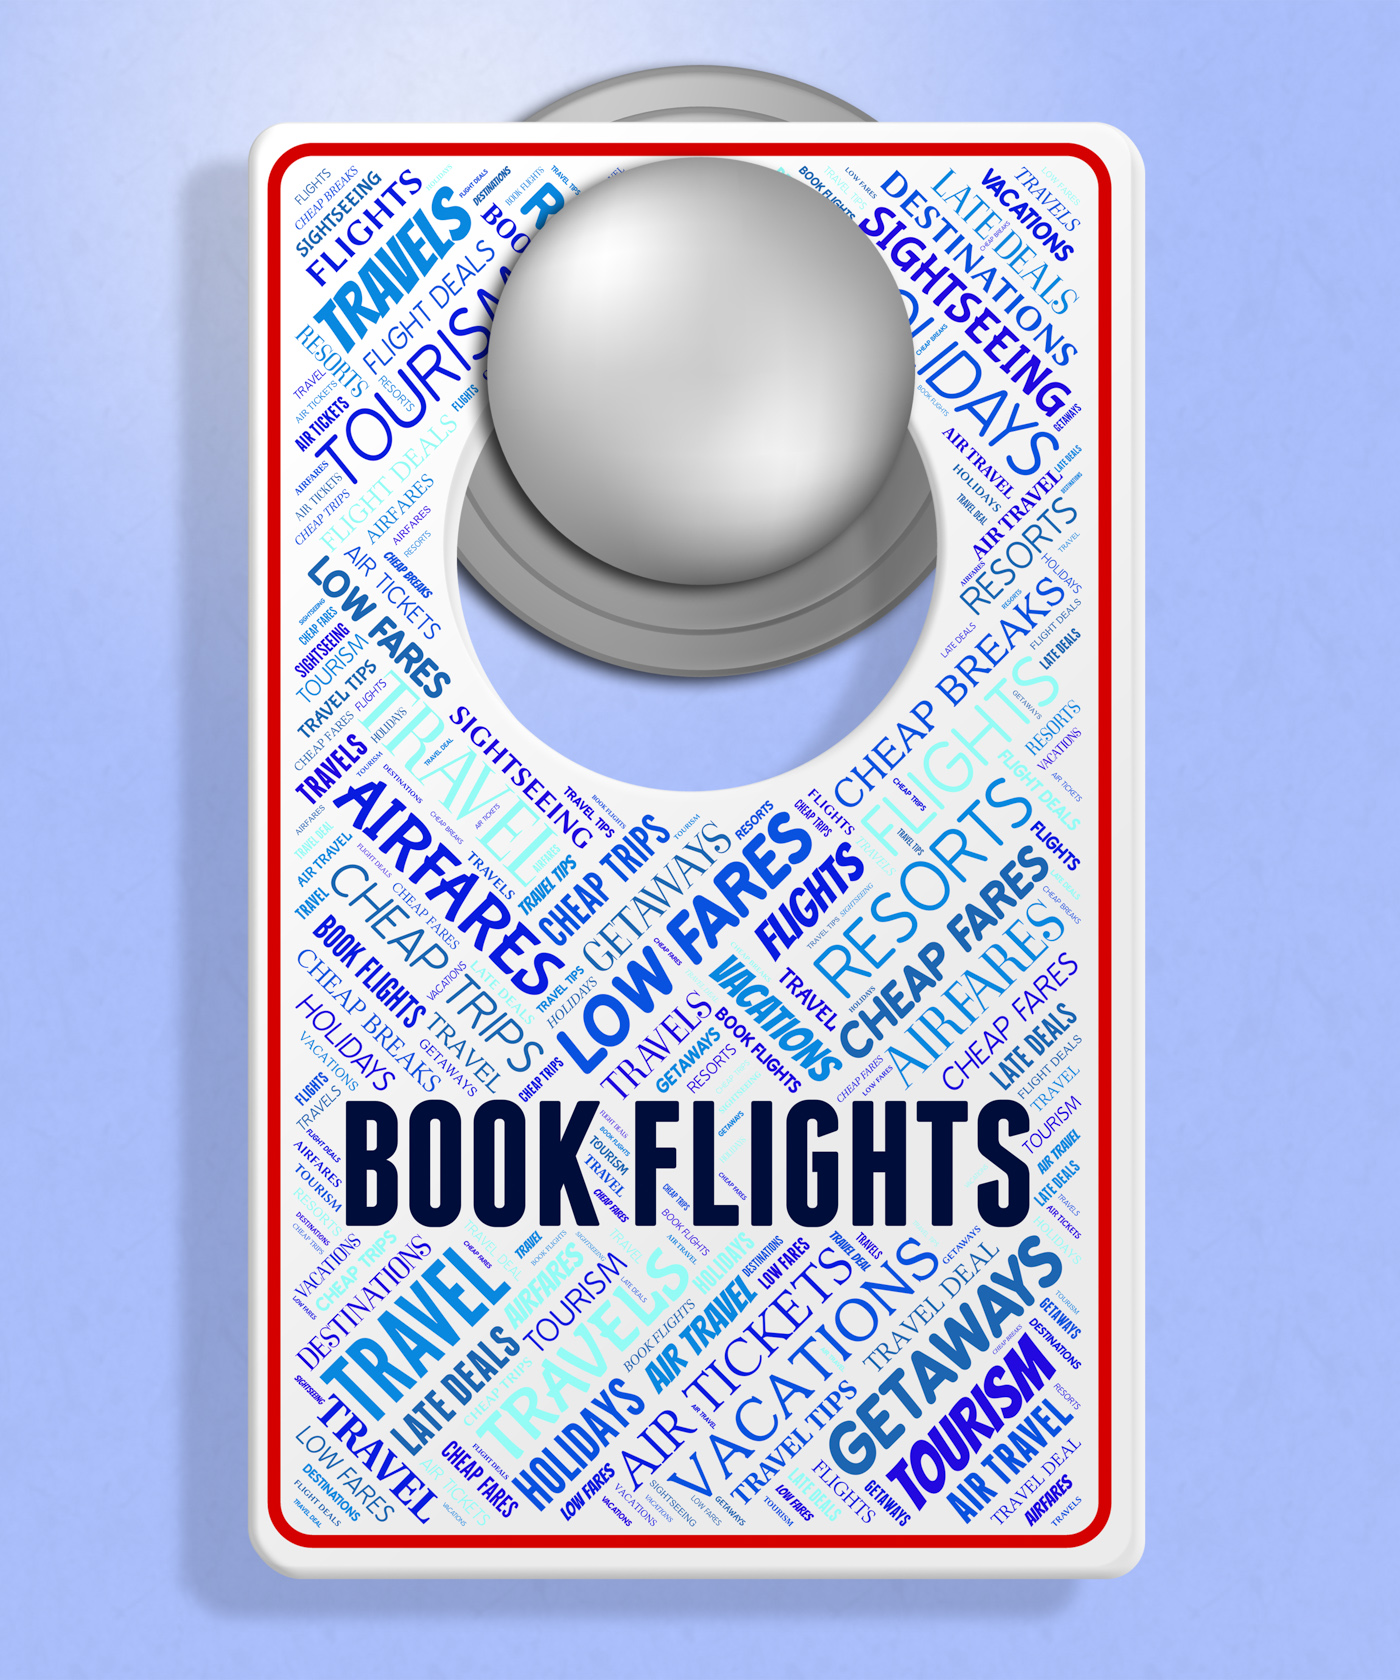 Book Flights Shows Order Booked And Flying, Aeroplane, Order, Signs, Signboard, HQ Photo